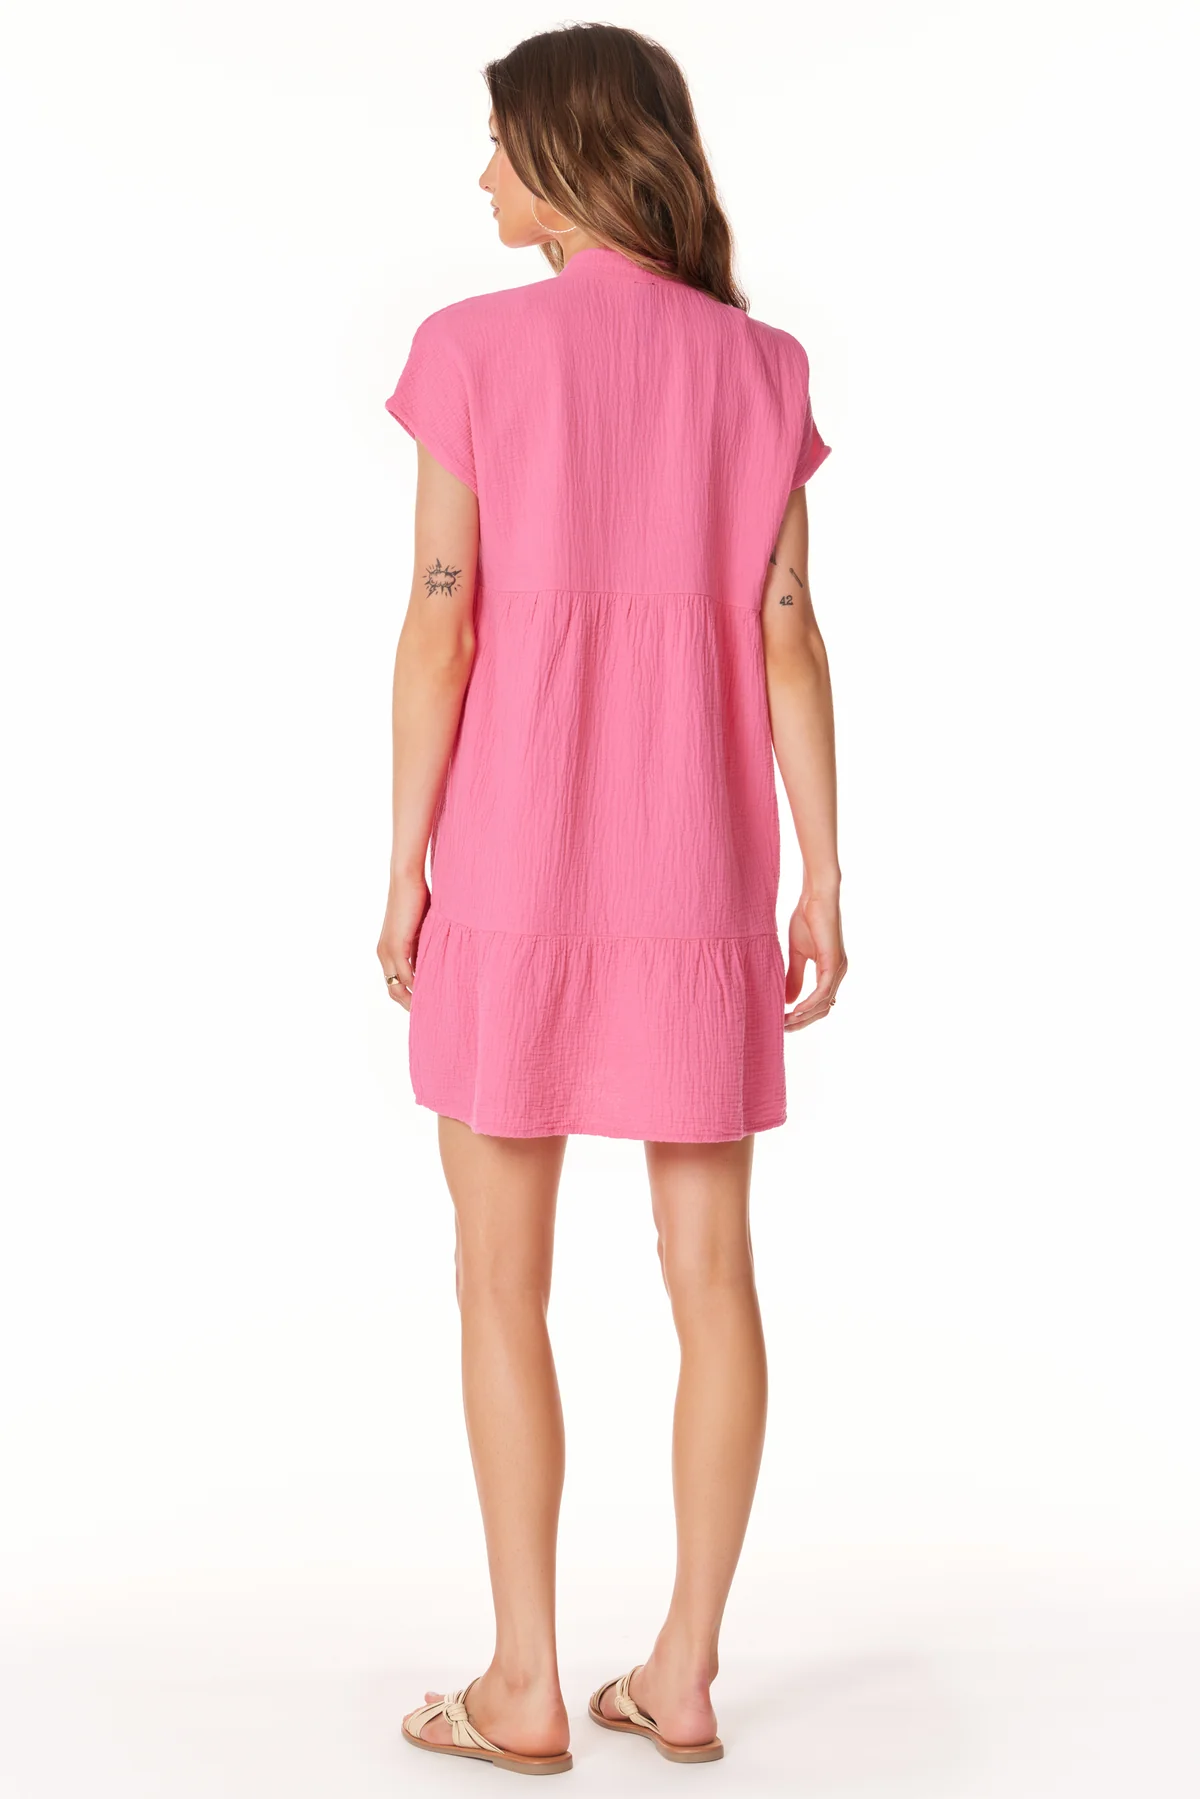 Bobi Tiered V Neck Dress in Tropical Pink - Size L Available